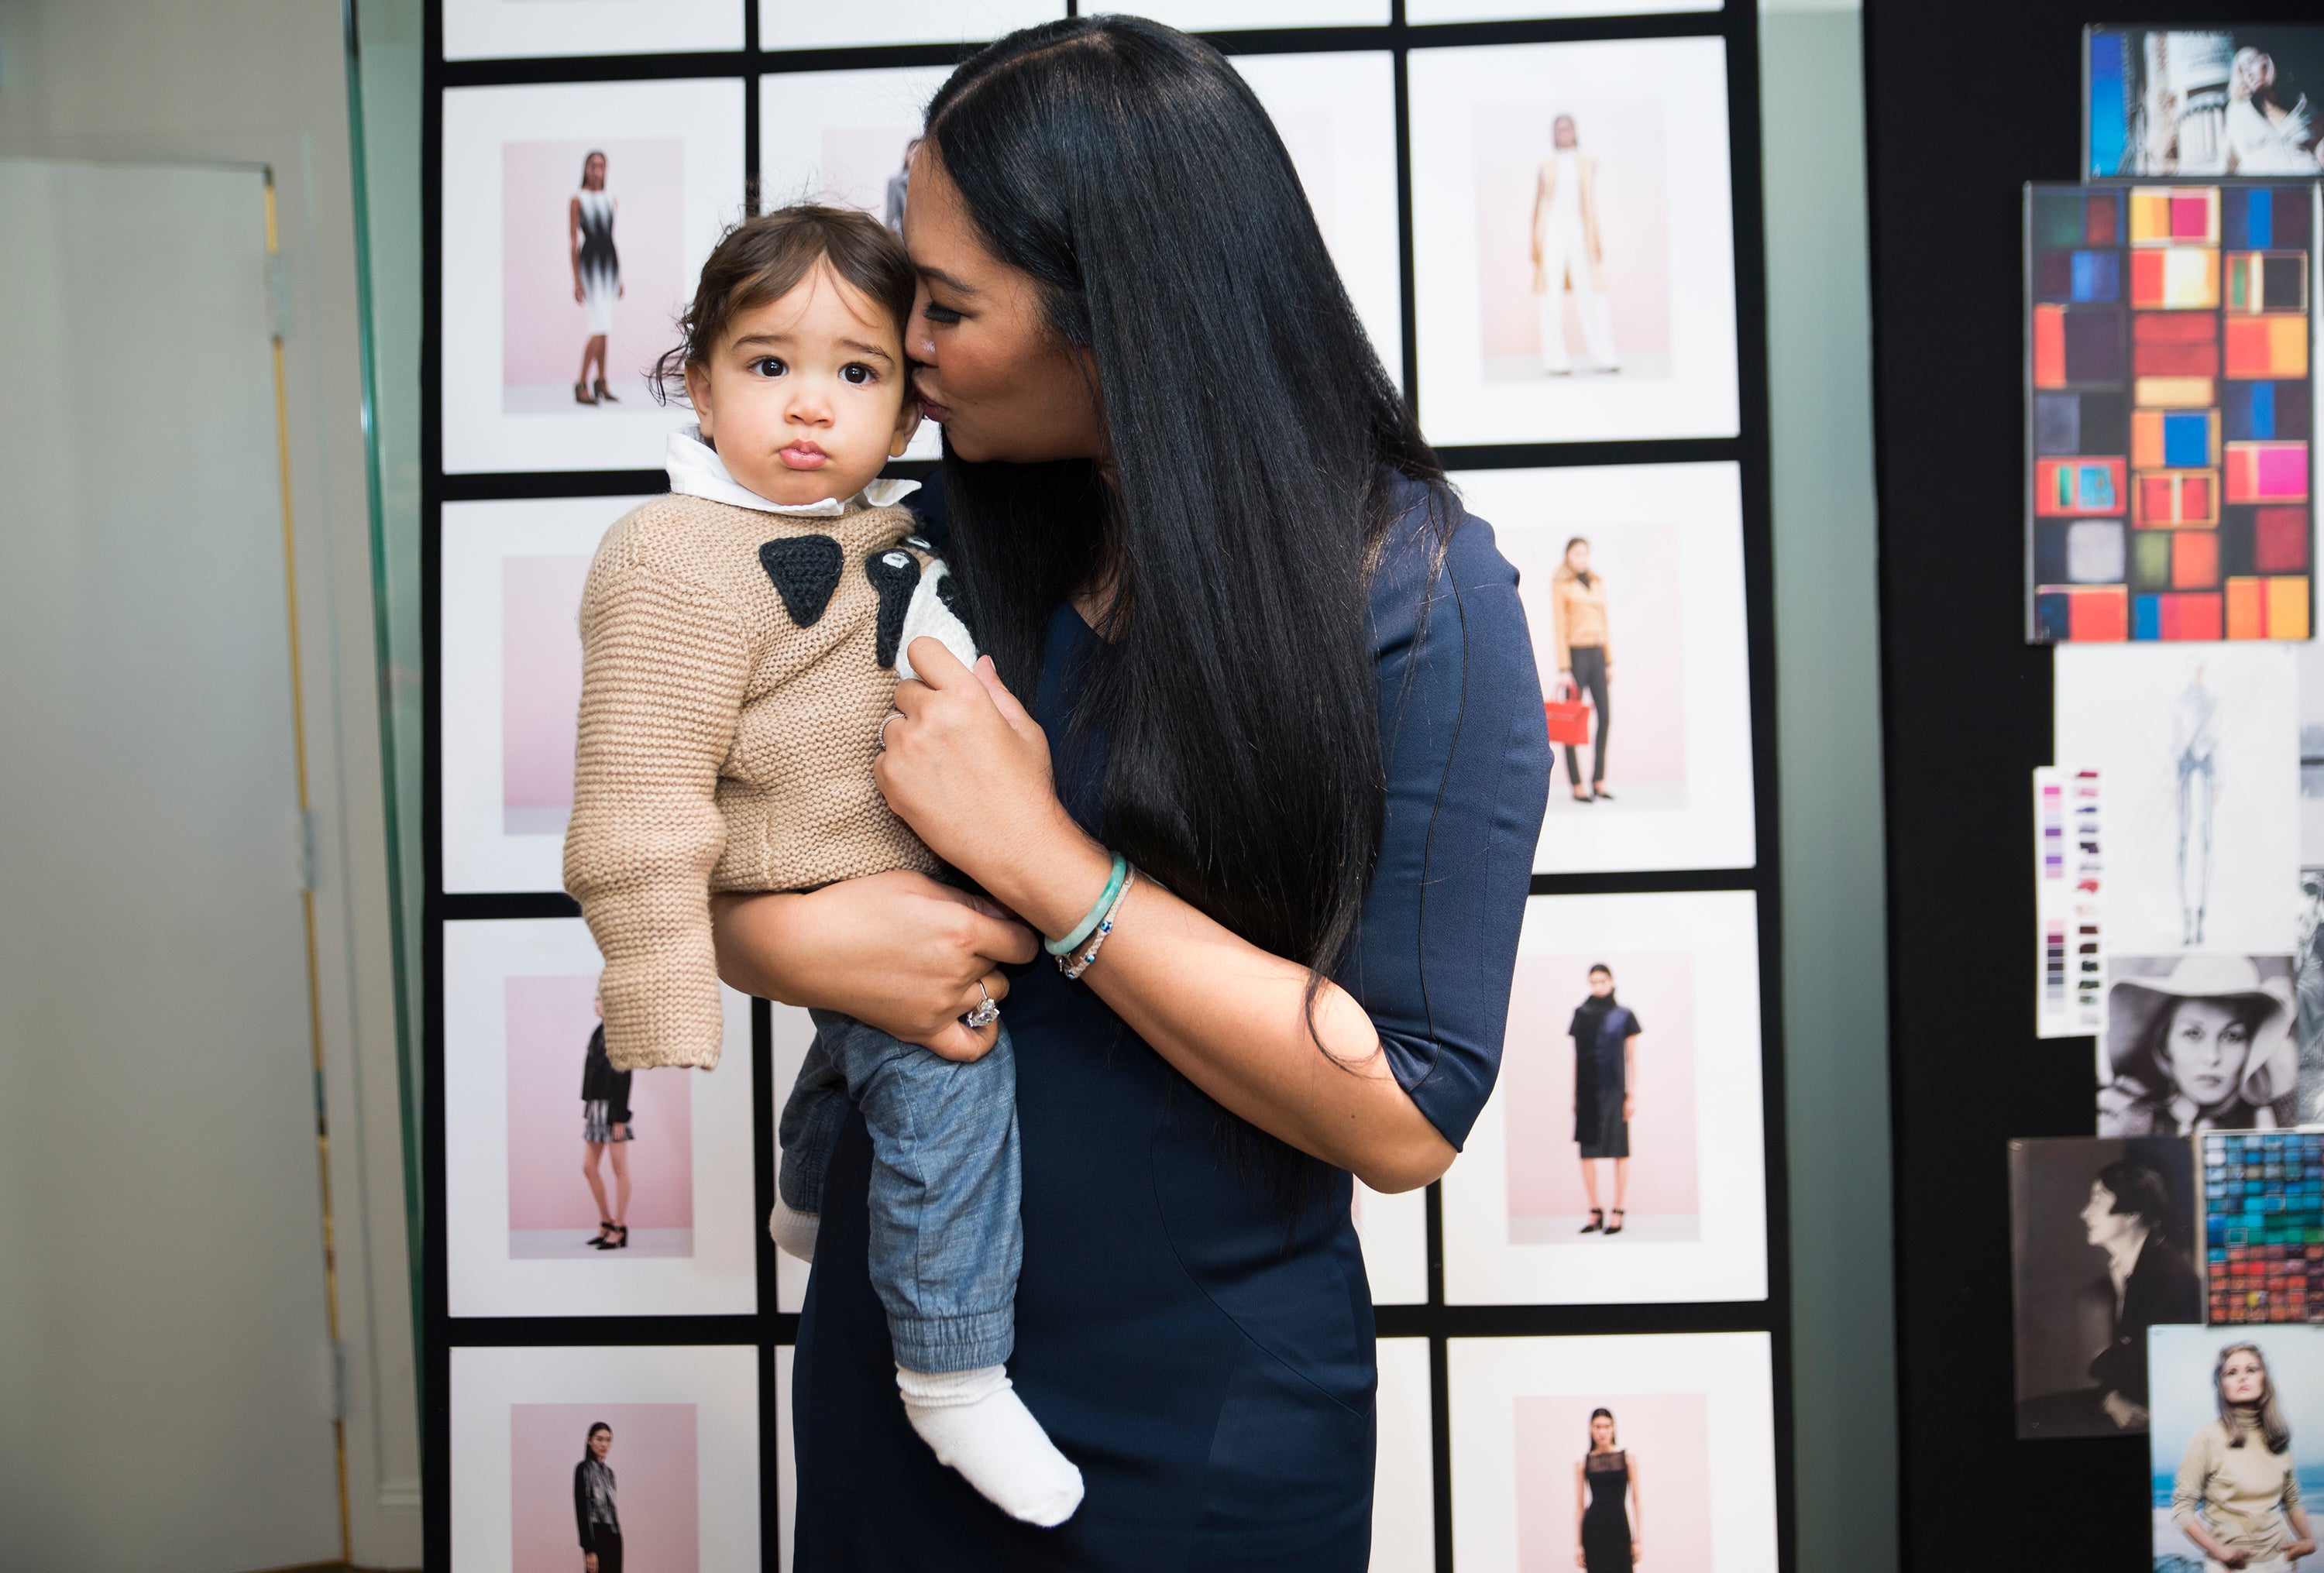 Photo Fab! Kimora Lee's Son Wolfe Lee Is Too Adorable For Words
